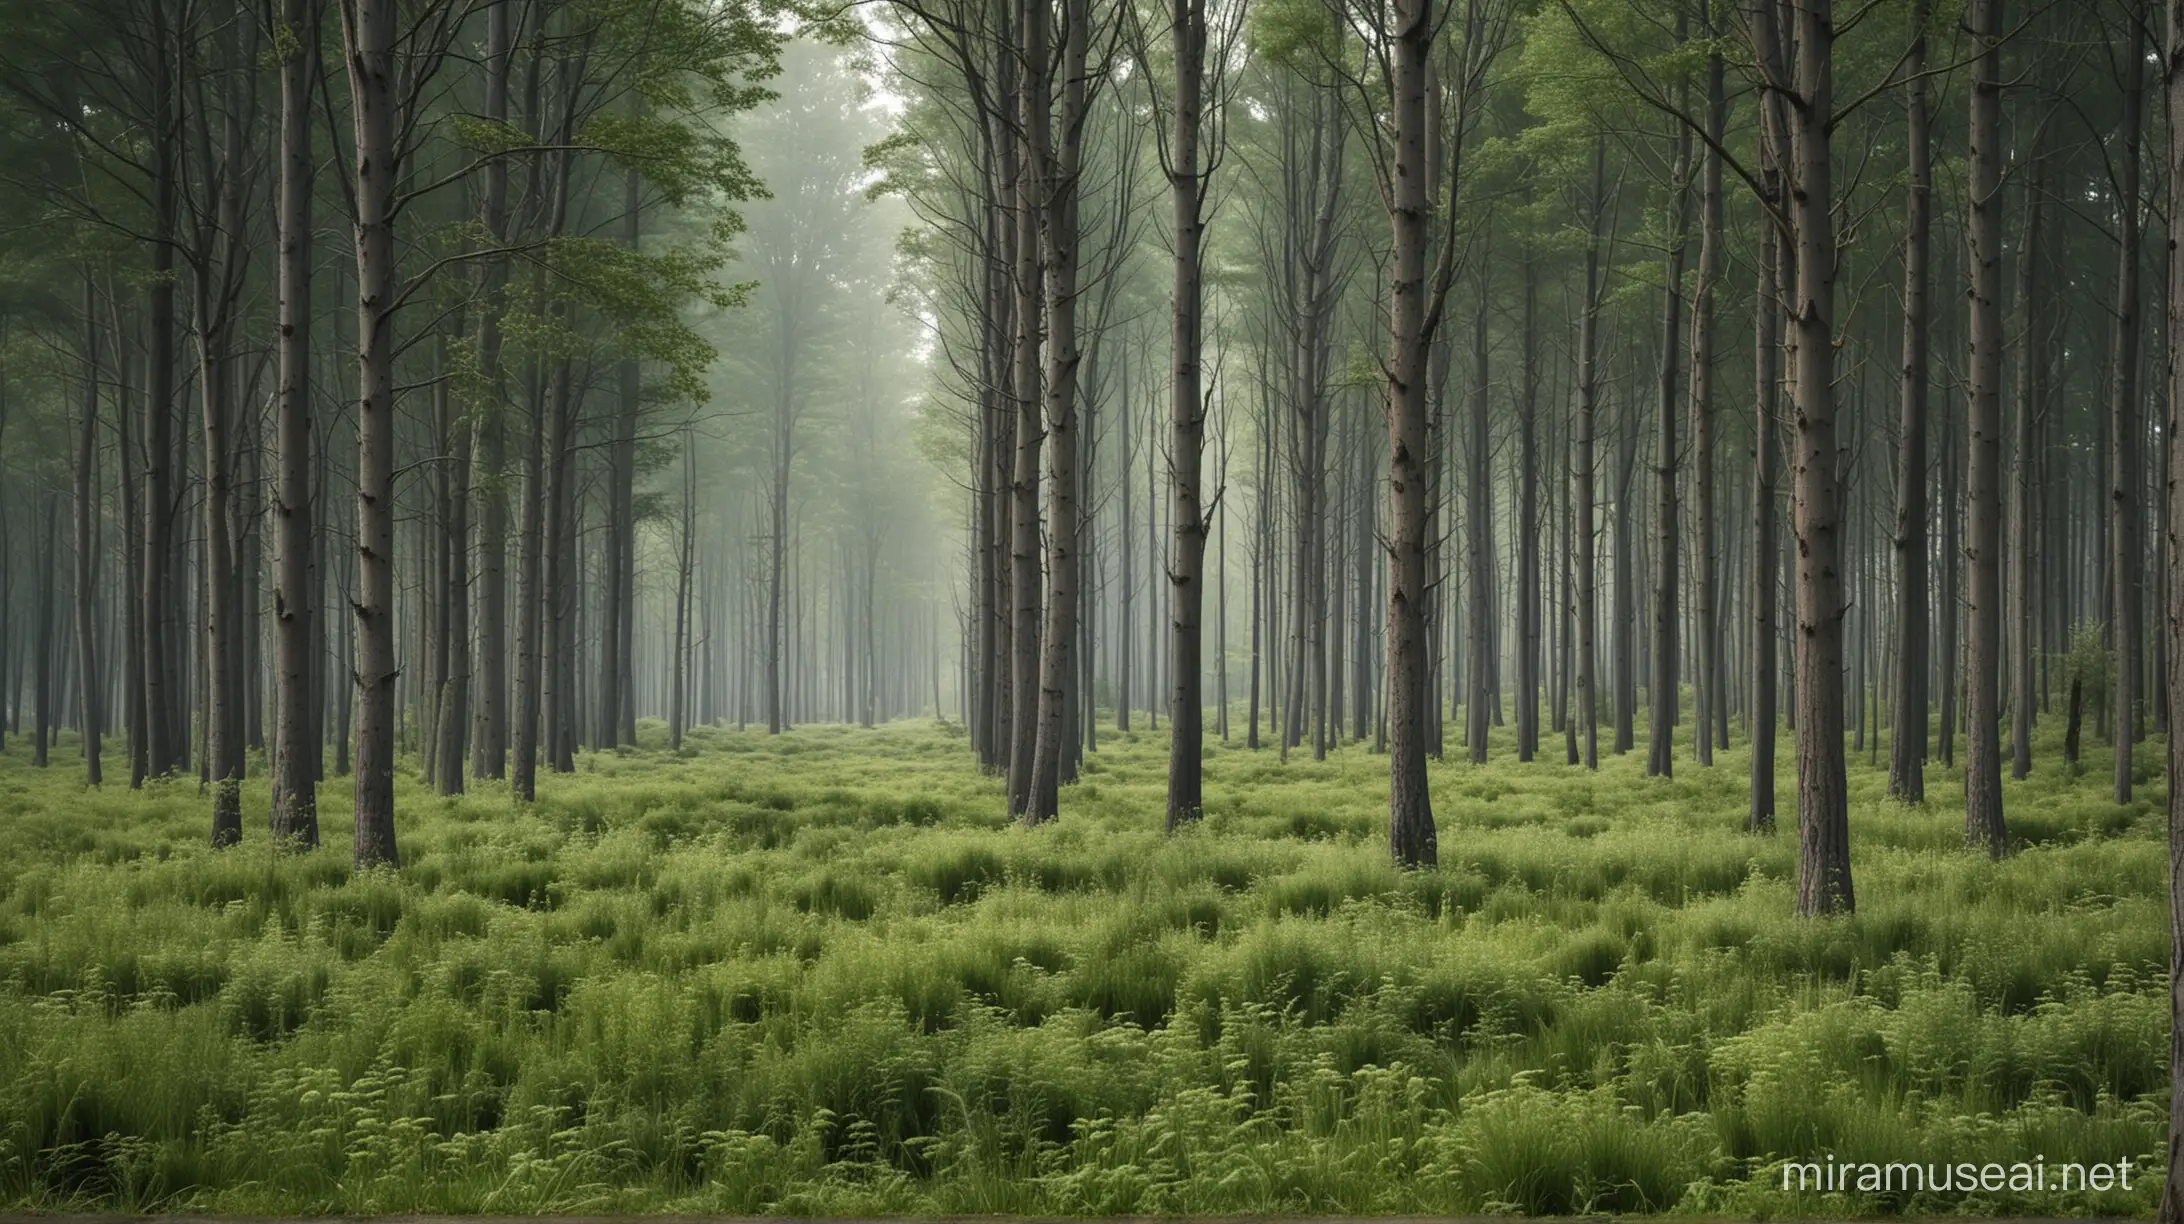 Lush Forest Landscape with Verdant Trees and Flourishing Greenery